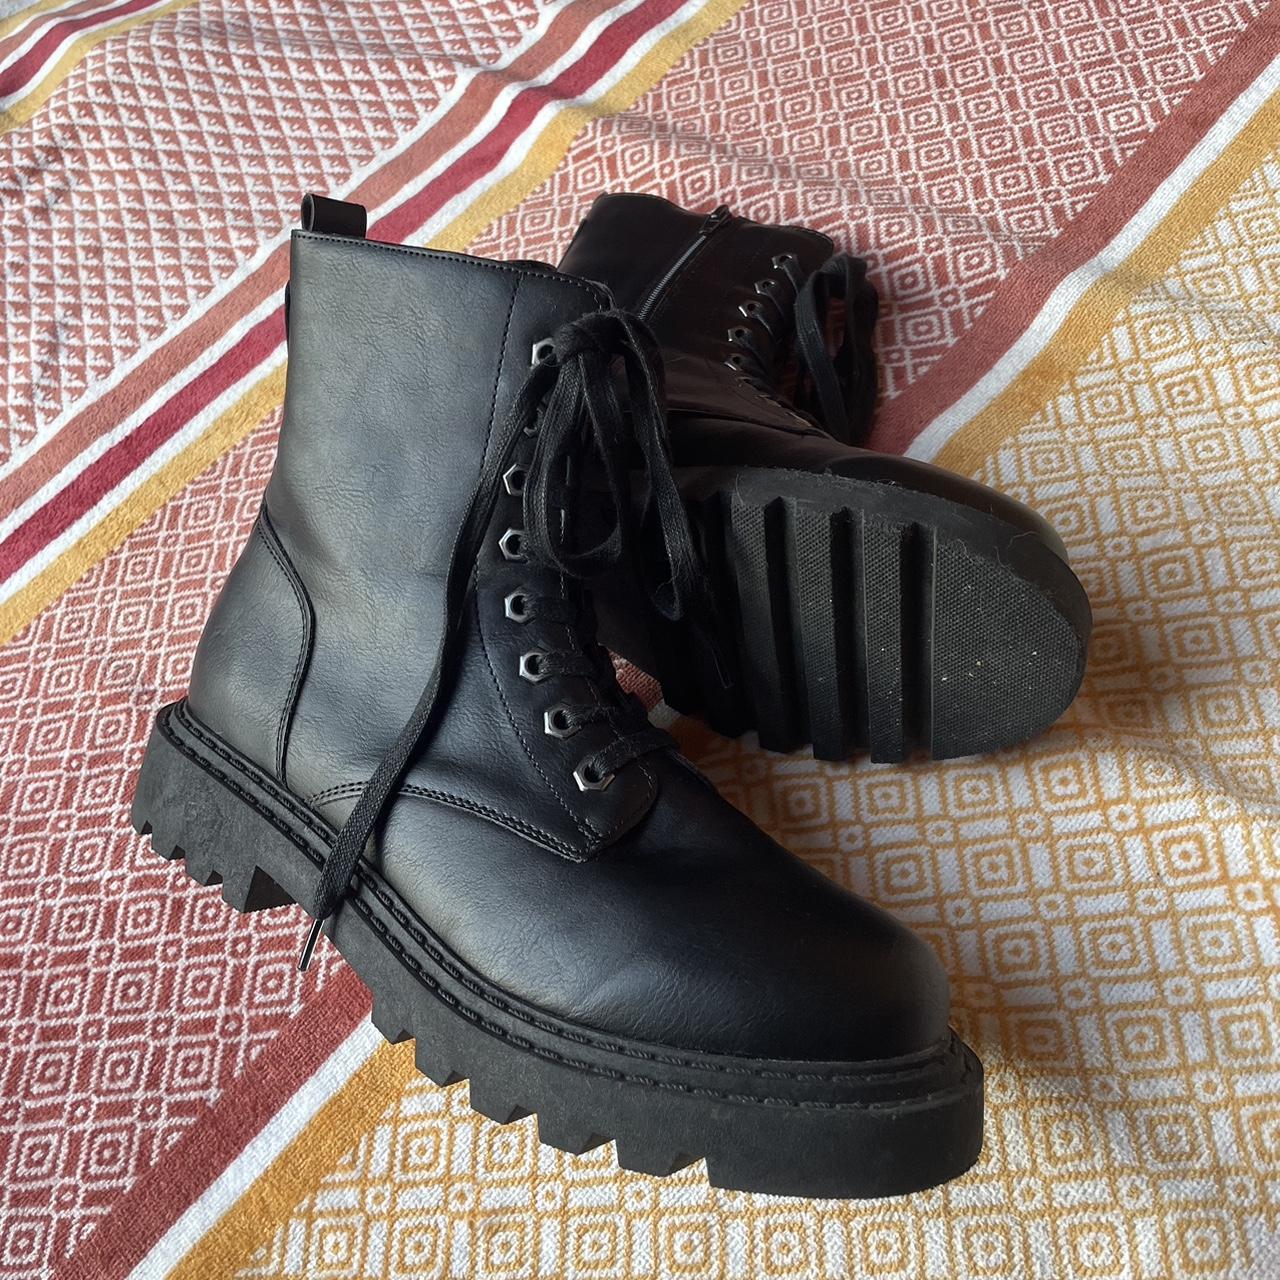 Black combat boots - warn a couple times - size 10 - Depop